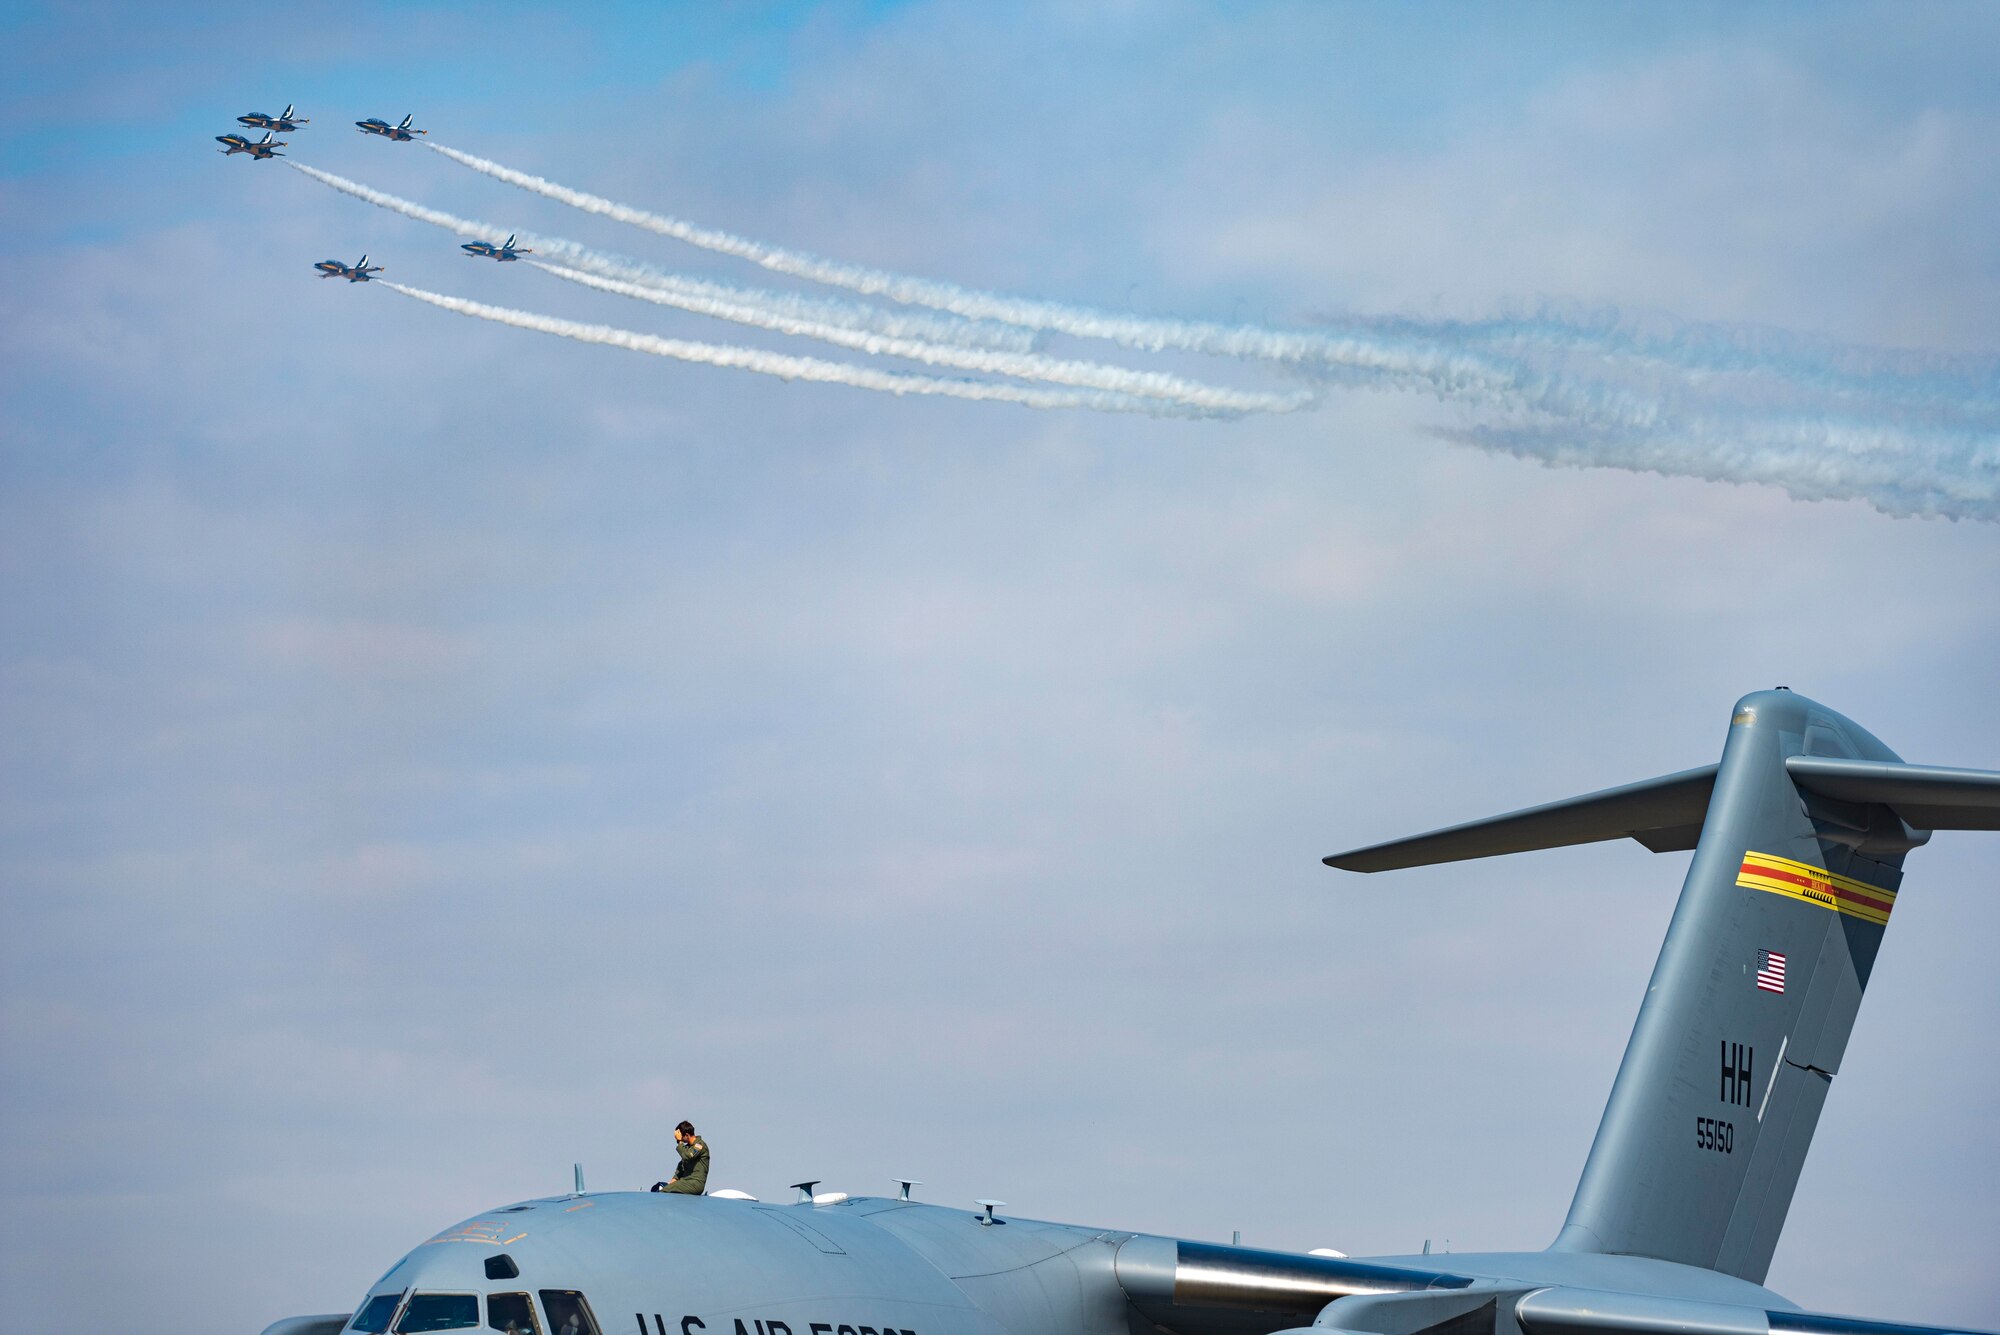 A U.S. military member watches as the Republic of Korea Air Force Black Eagles perform during the Seoul International Aerospace and Defense Exhibition 2021 at Seoul Air Base, ROK, Oct. 18. Seoul ADEX 21 is the largest, most comprehensive event of its kind in Northeast Asia, attracting aviation and industry professionals, key defense personnel, aviation enthusiasts and the general public alike. (U.S. Air Force photo by Staff Sgt. Gabrielle Spalding)